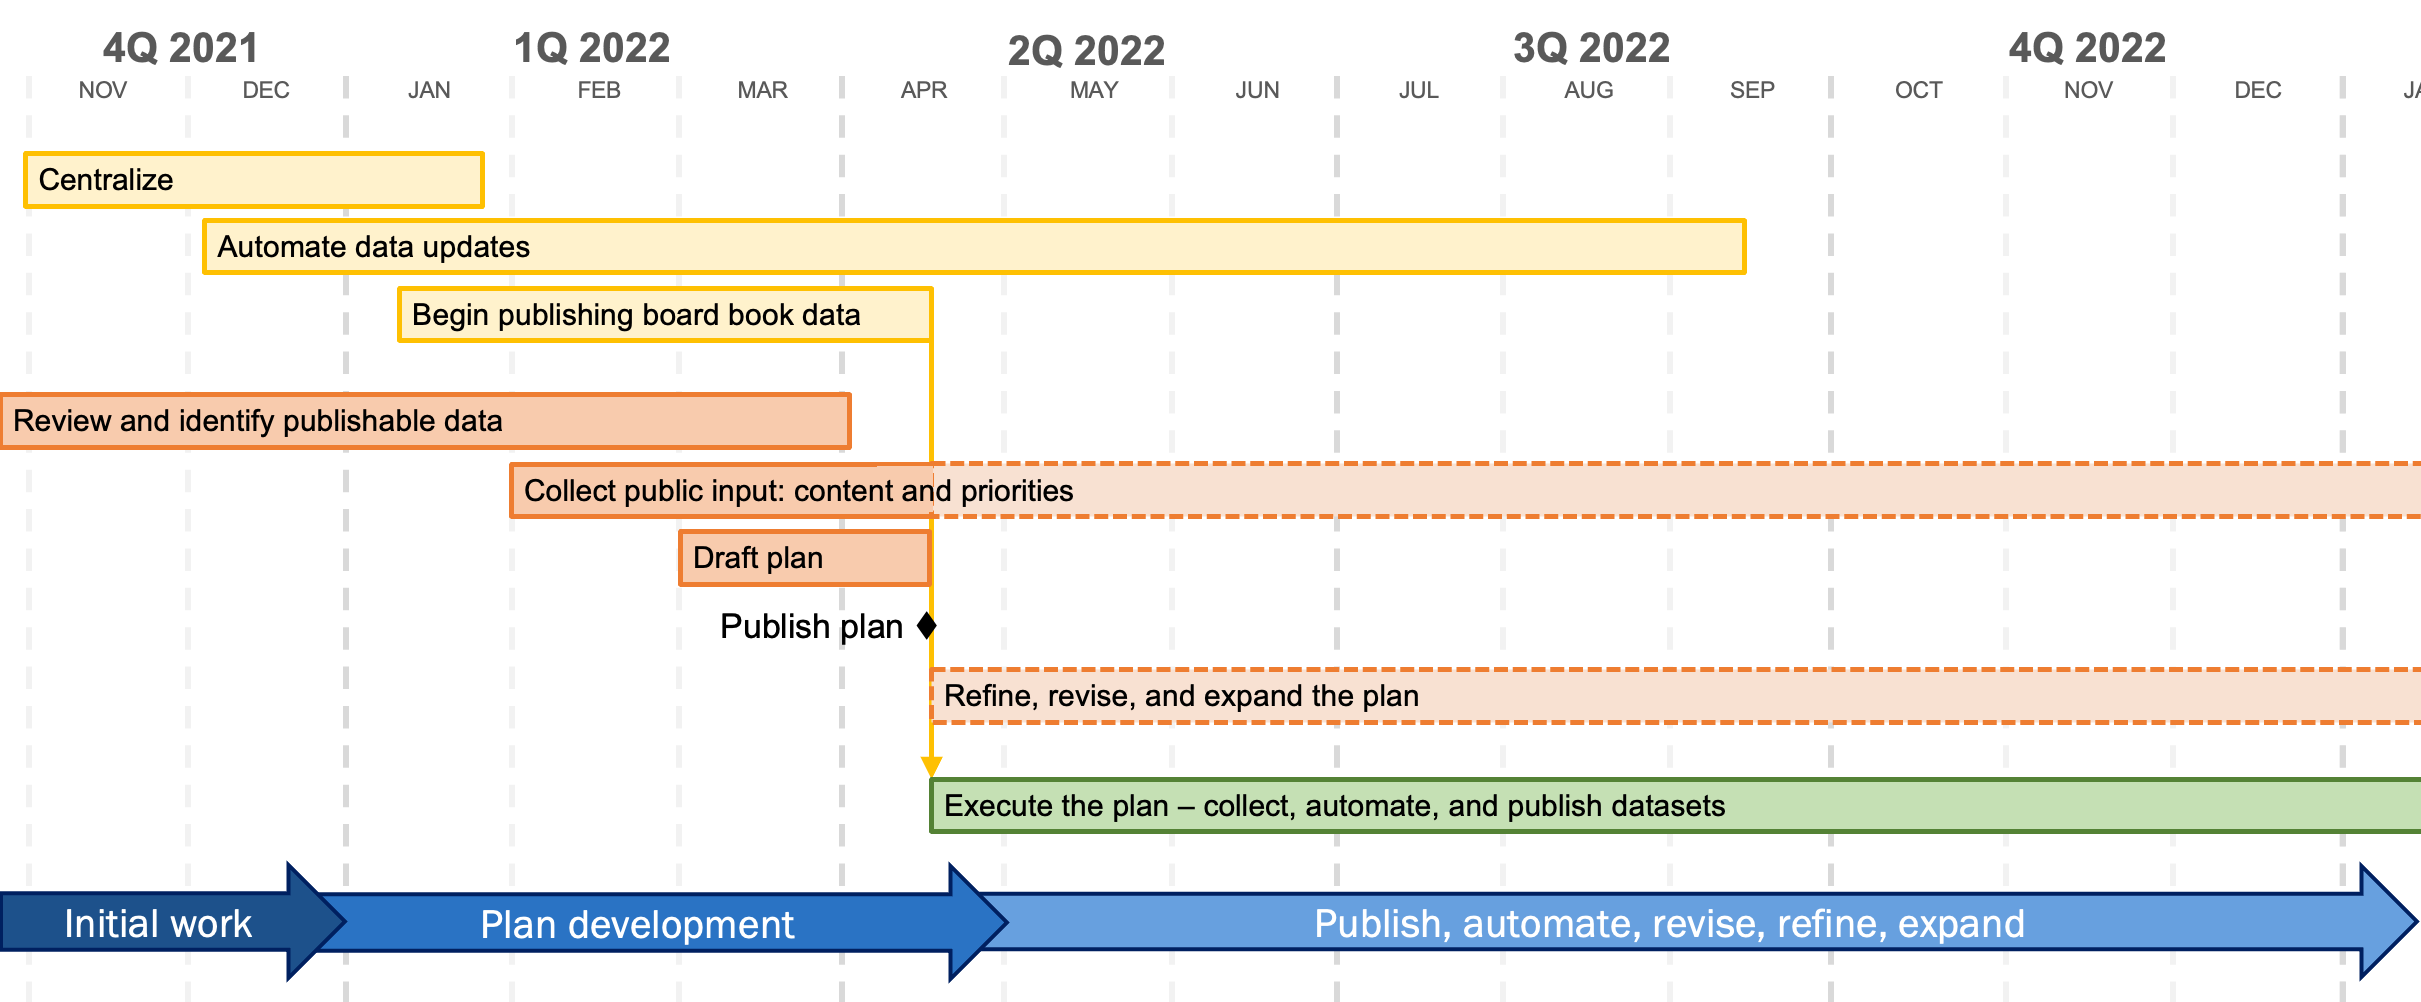 Timeline showing activities within the Open Data Program